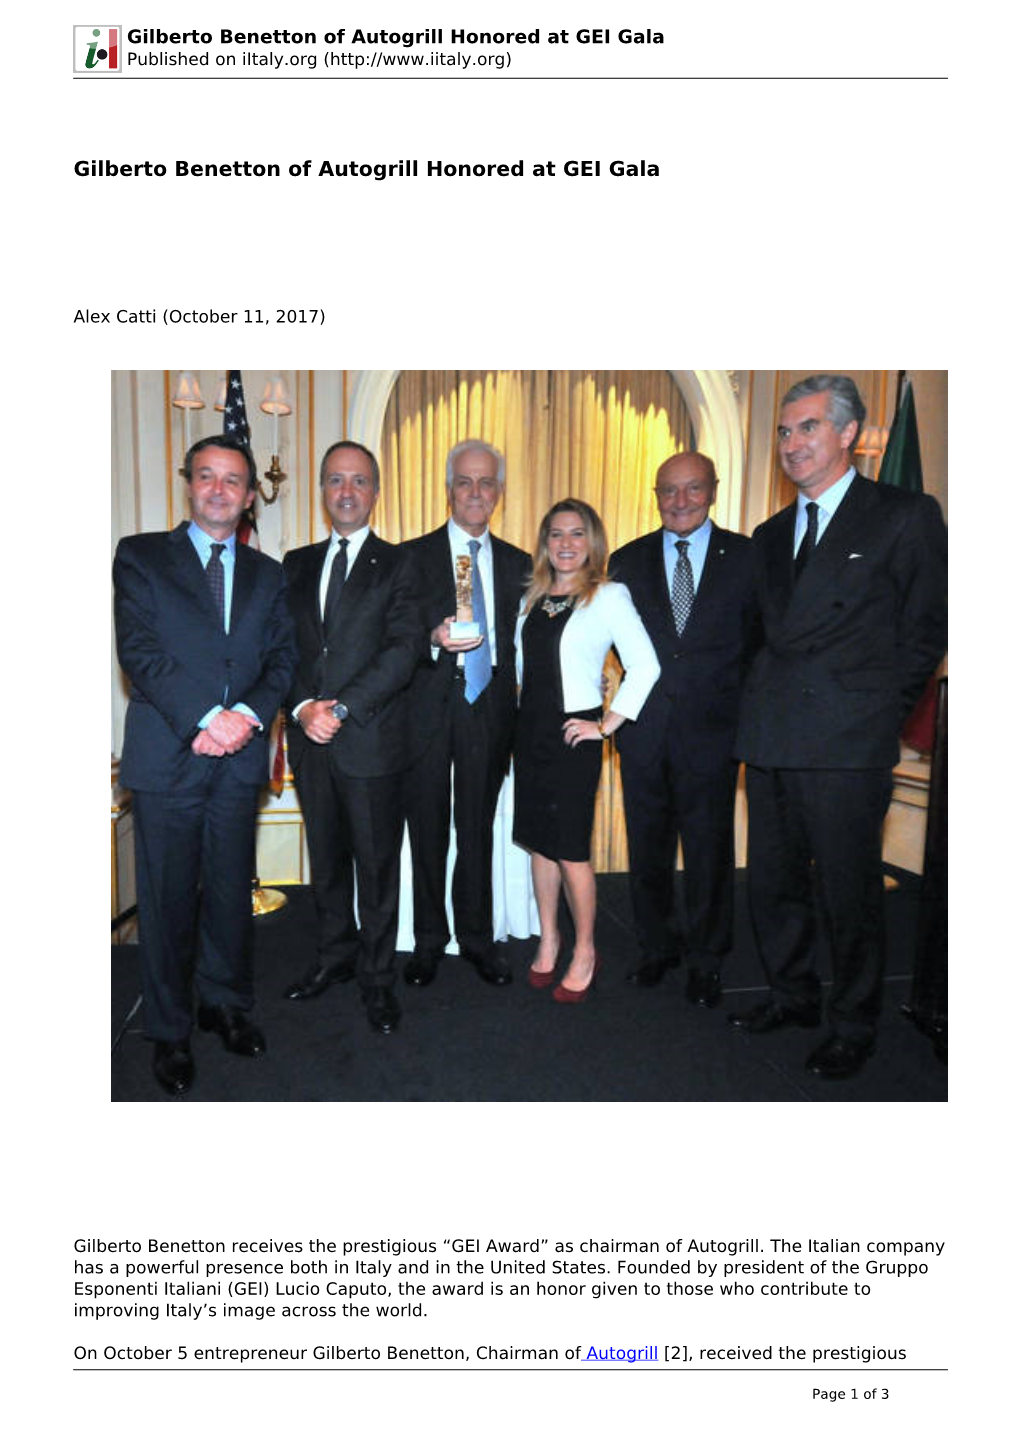 Gilberto Benetton of Autogrill Honored at GEI Gala Published on Iitaly.Org (